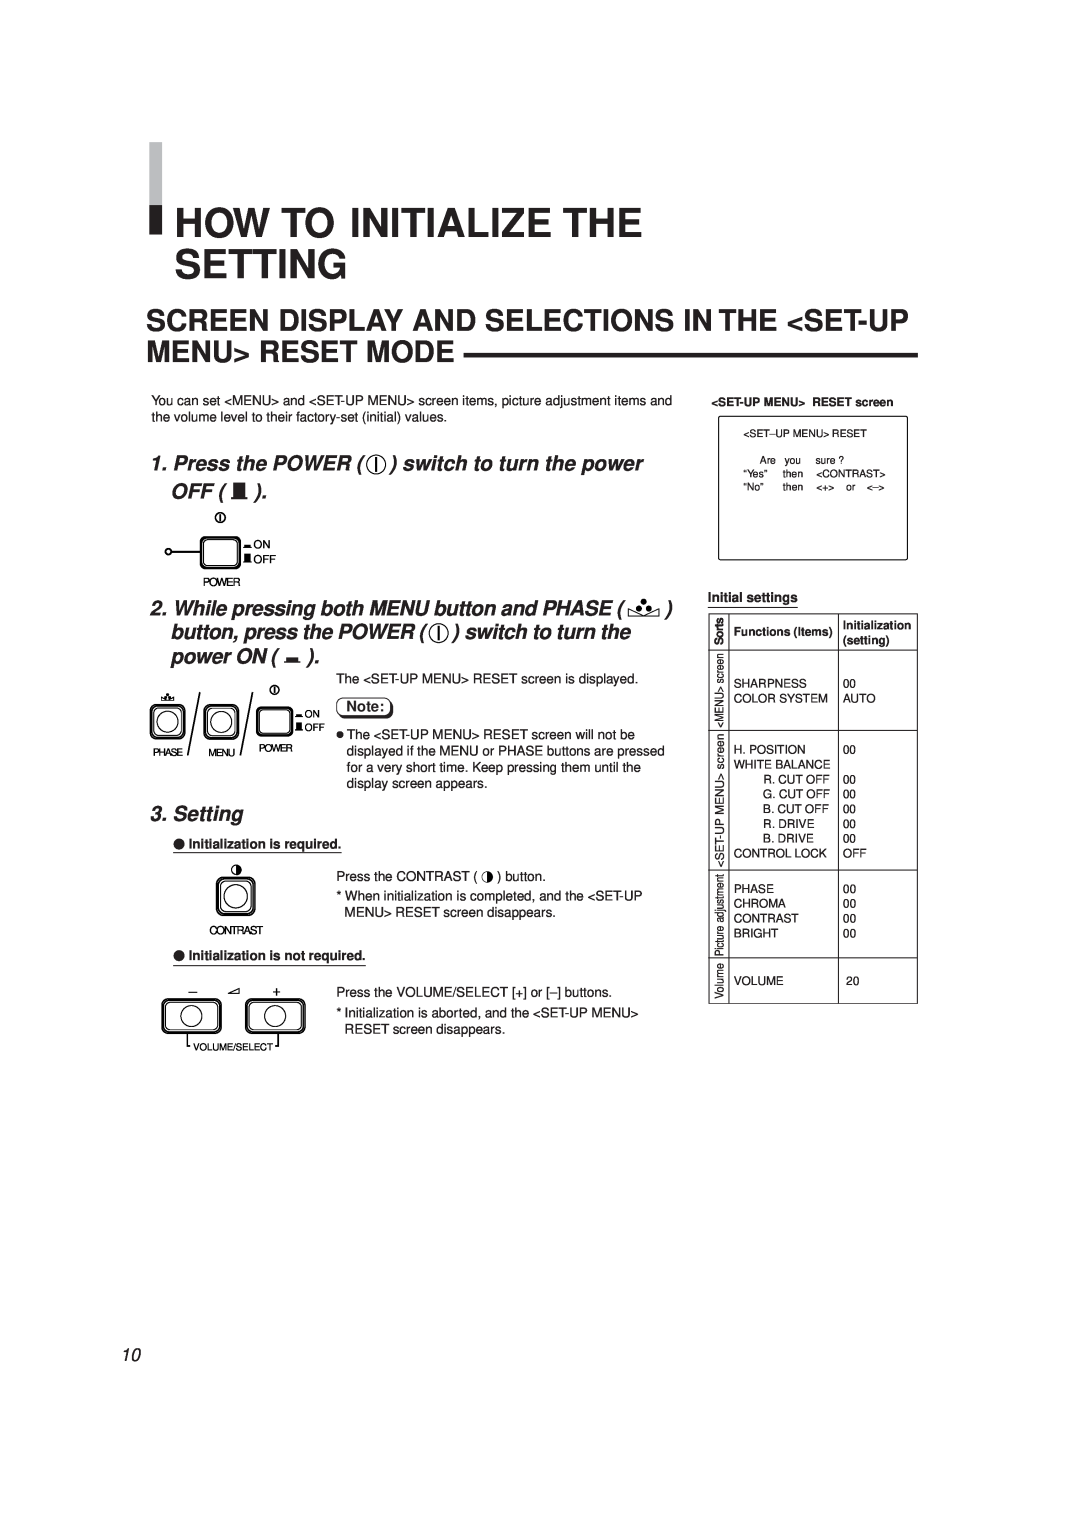 JVC TM-A130SU How To Initialize The Setting, Screen Display And Selections In The Set-Up Menu Reset Mode, power ON, Sorts 